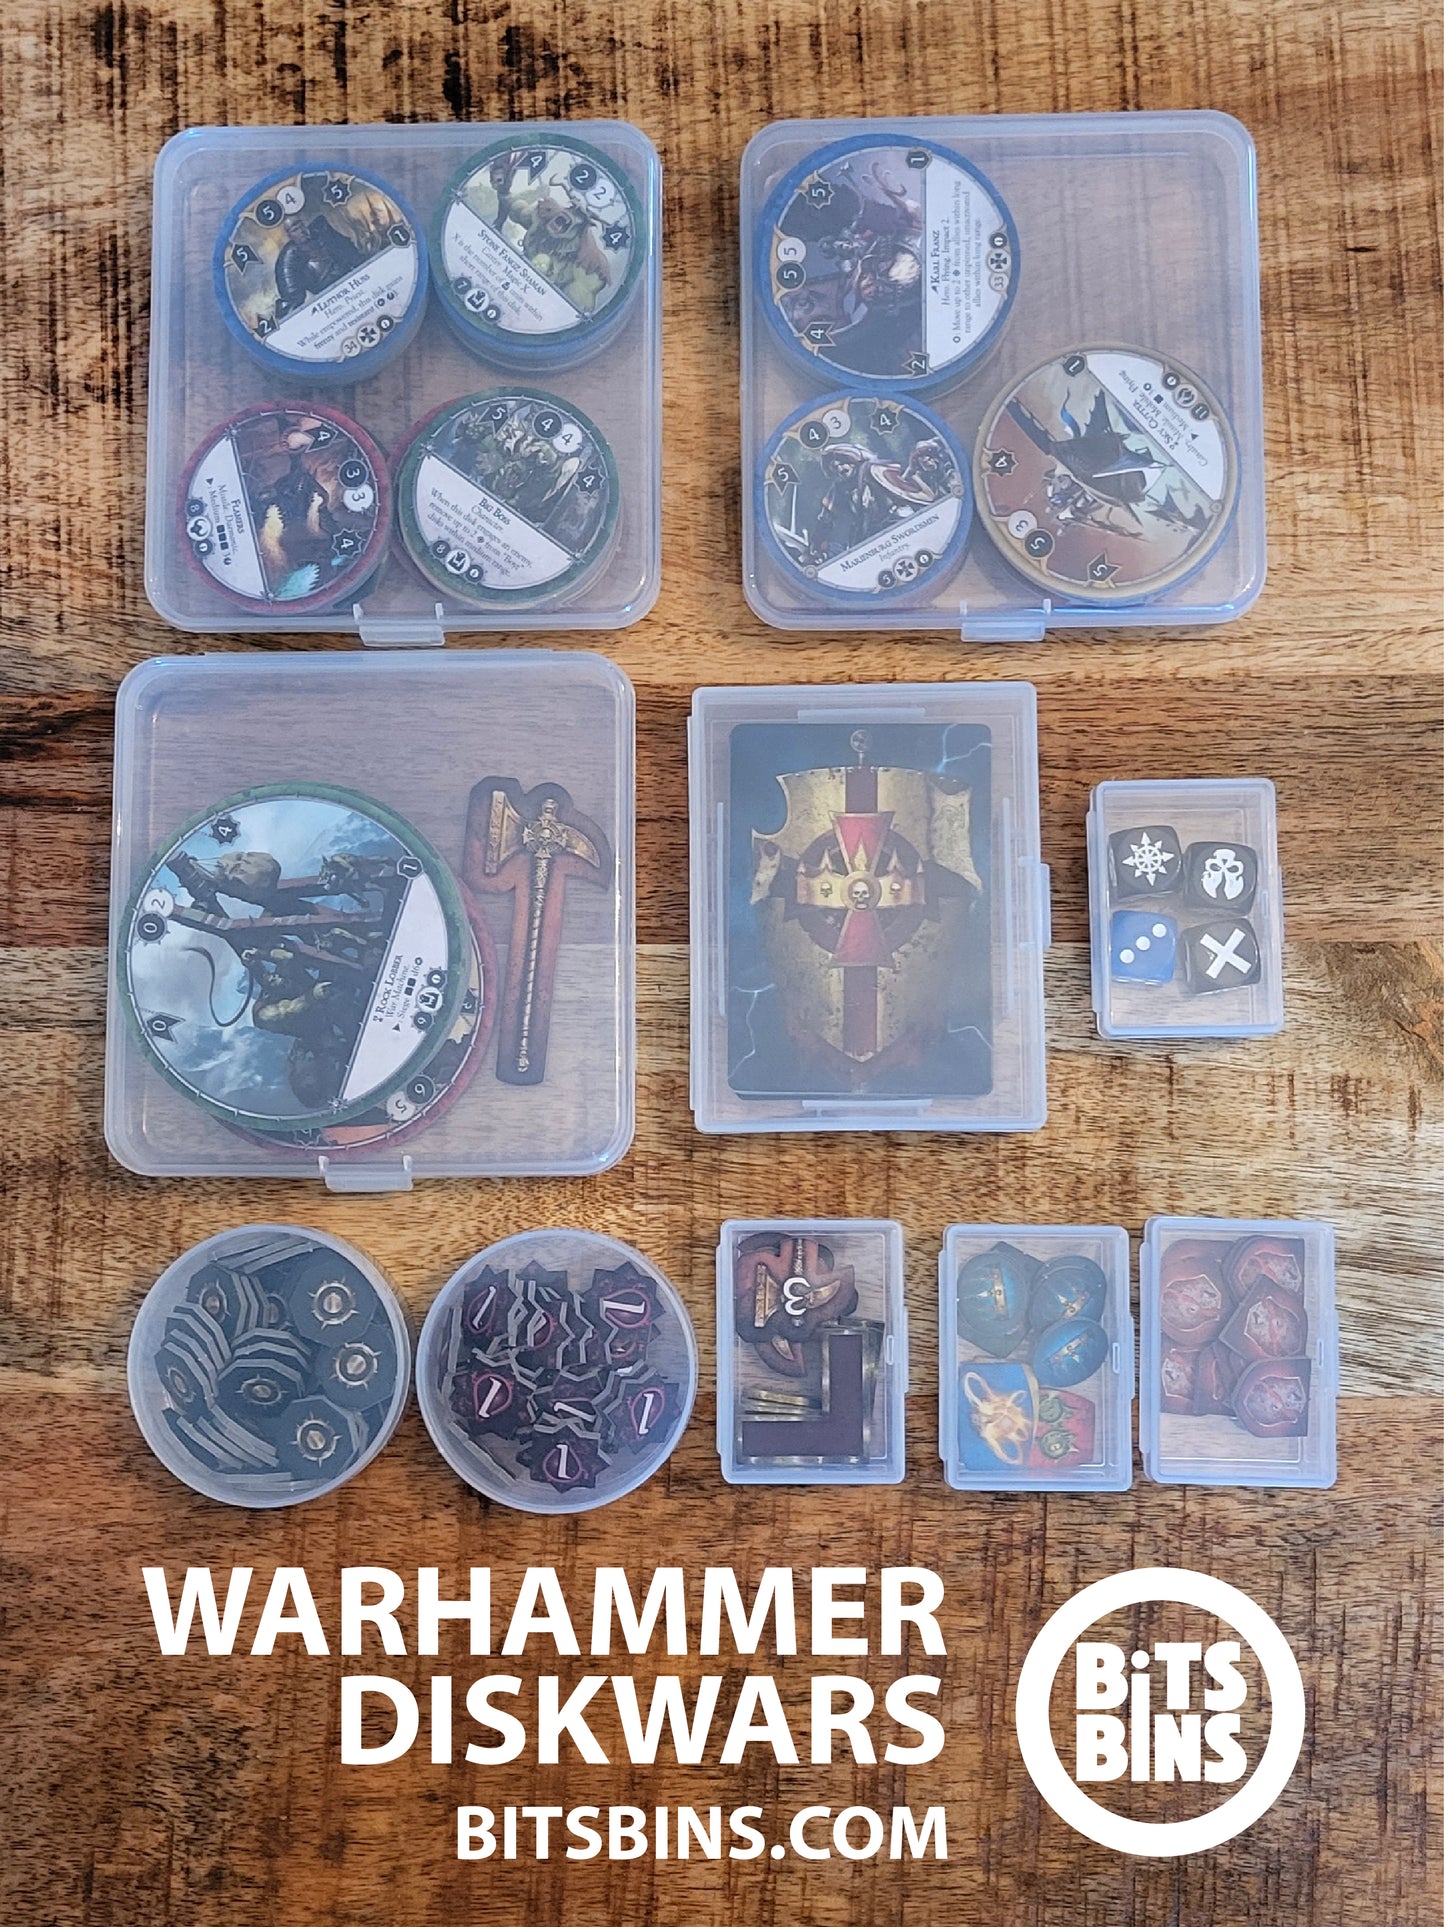 RECOMMENDED Bitsbins Warhammer Diskwars - 2 Pods, 4 Minis, 1 Card Box, 3 Flats